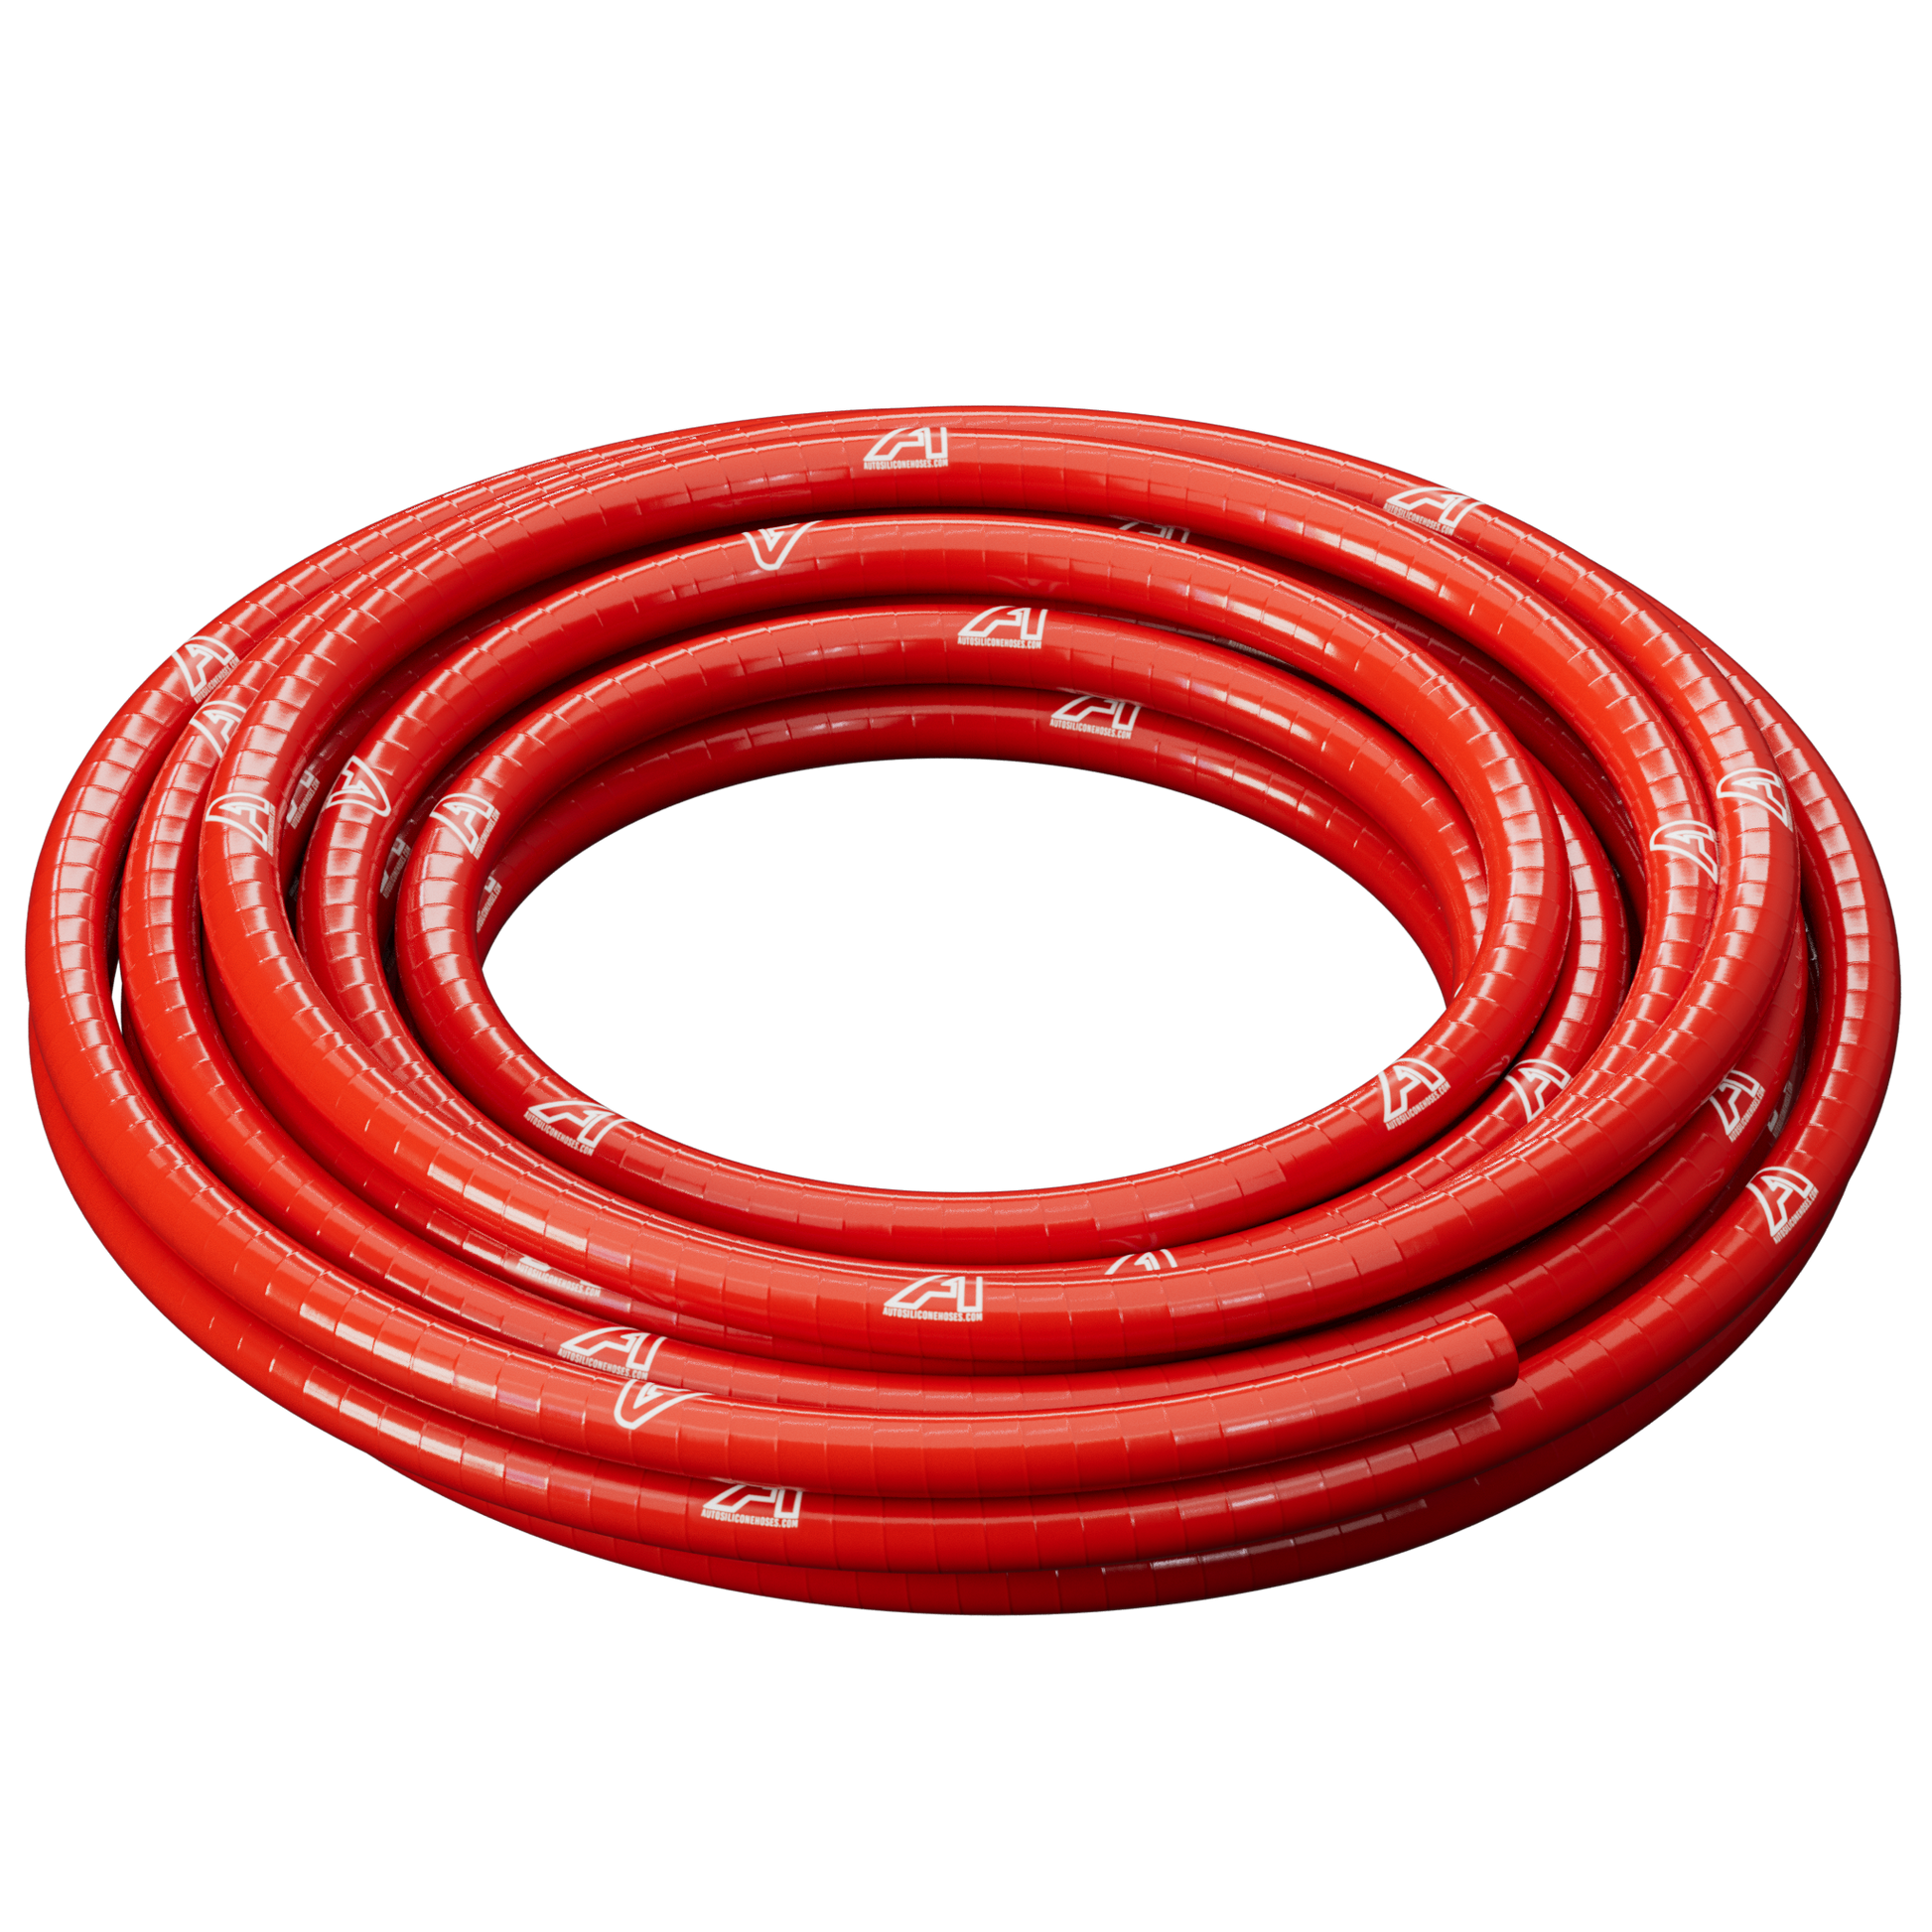 22mm ID Red Continuous Silicone Hose Motor Vehicle Engine Parts Auto Silicone Hoses   